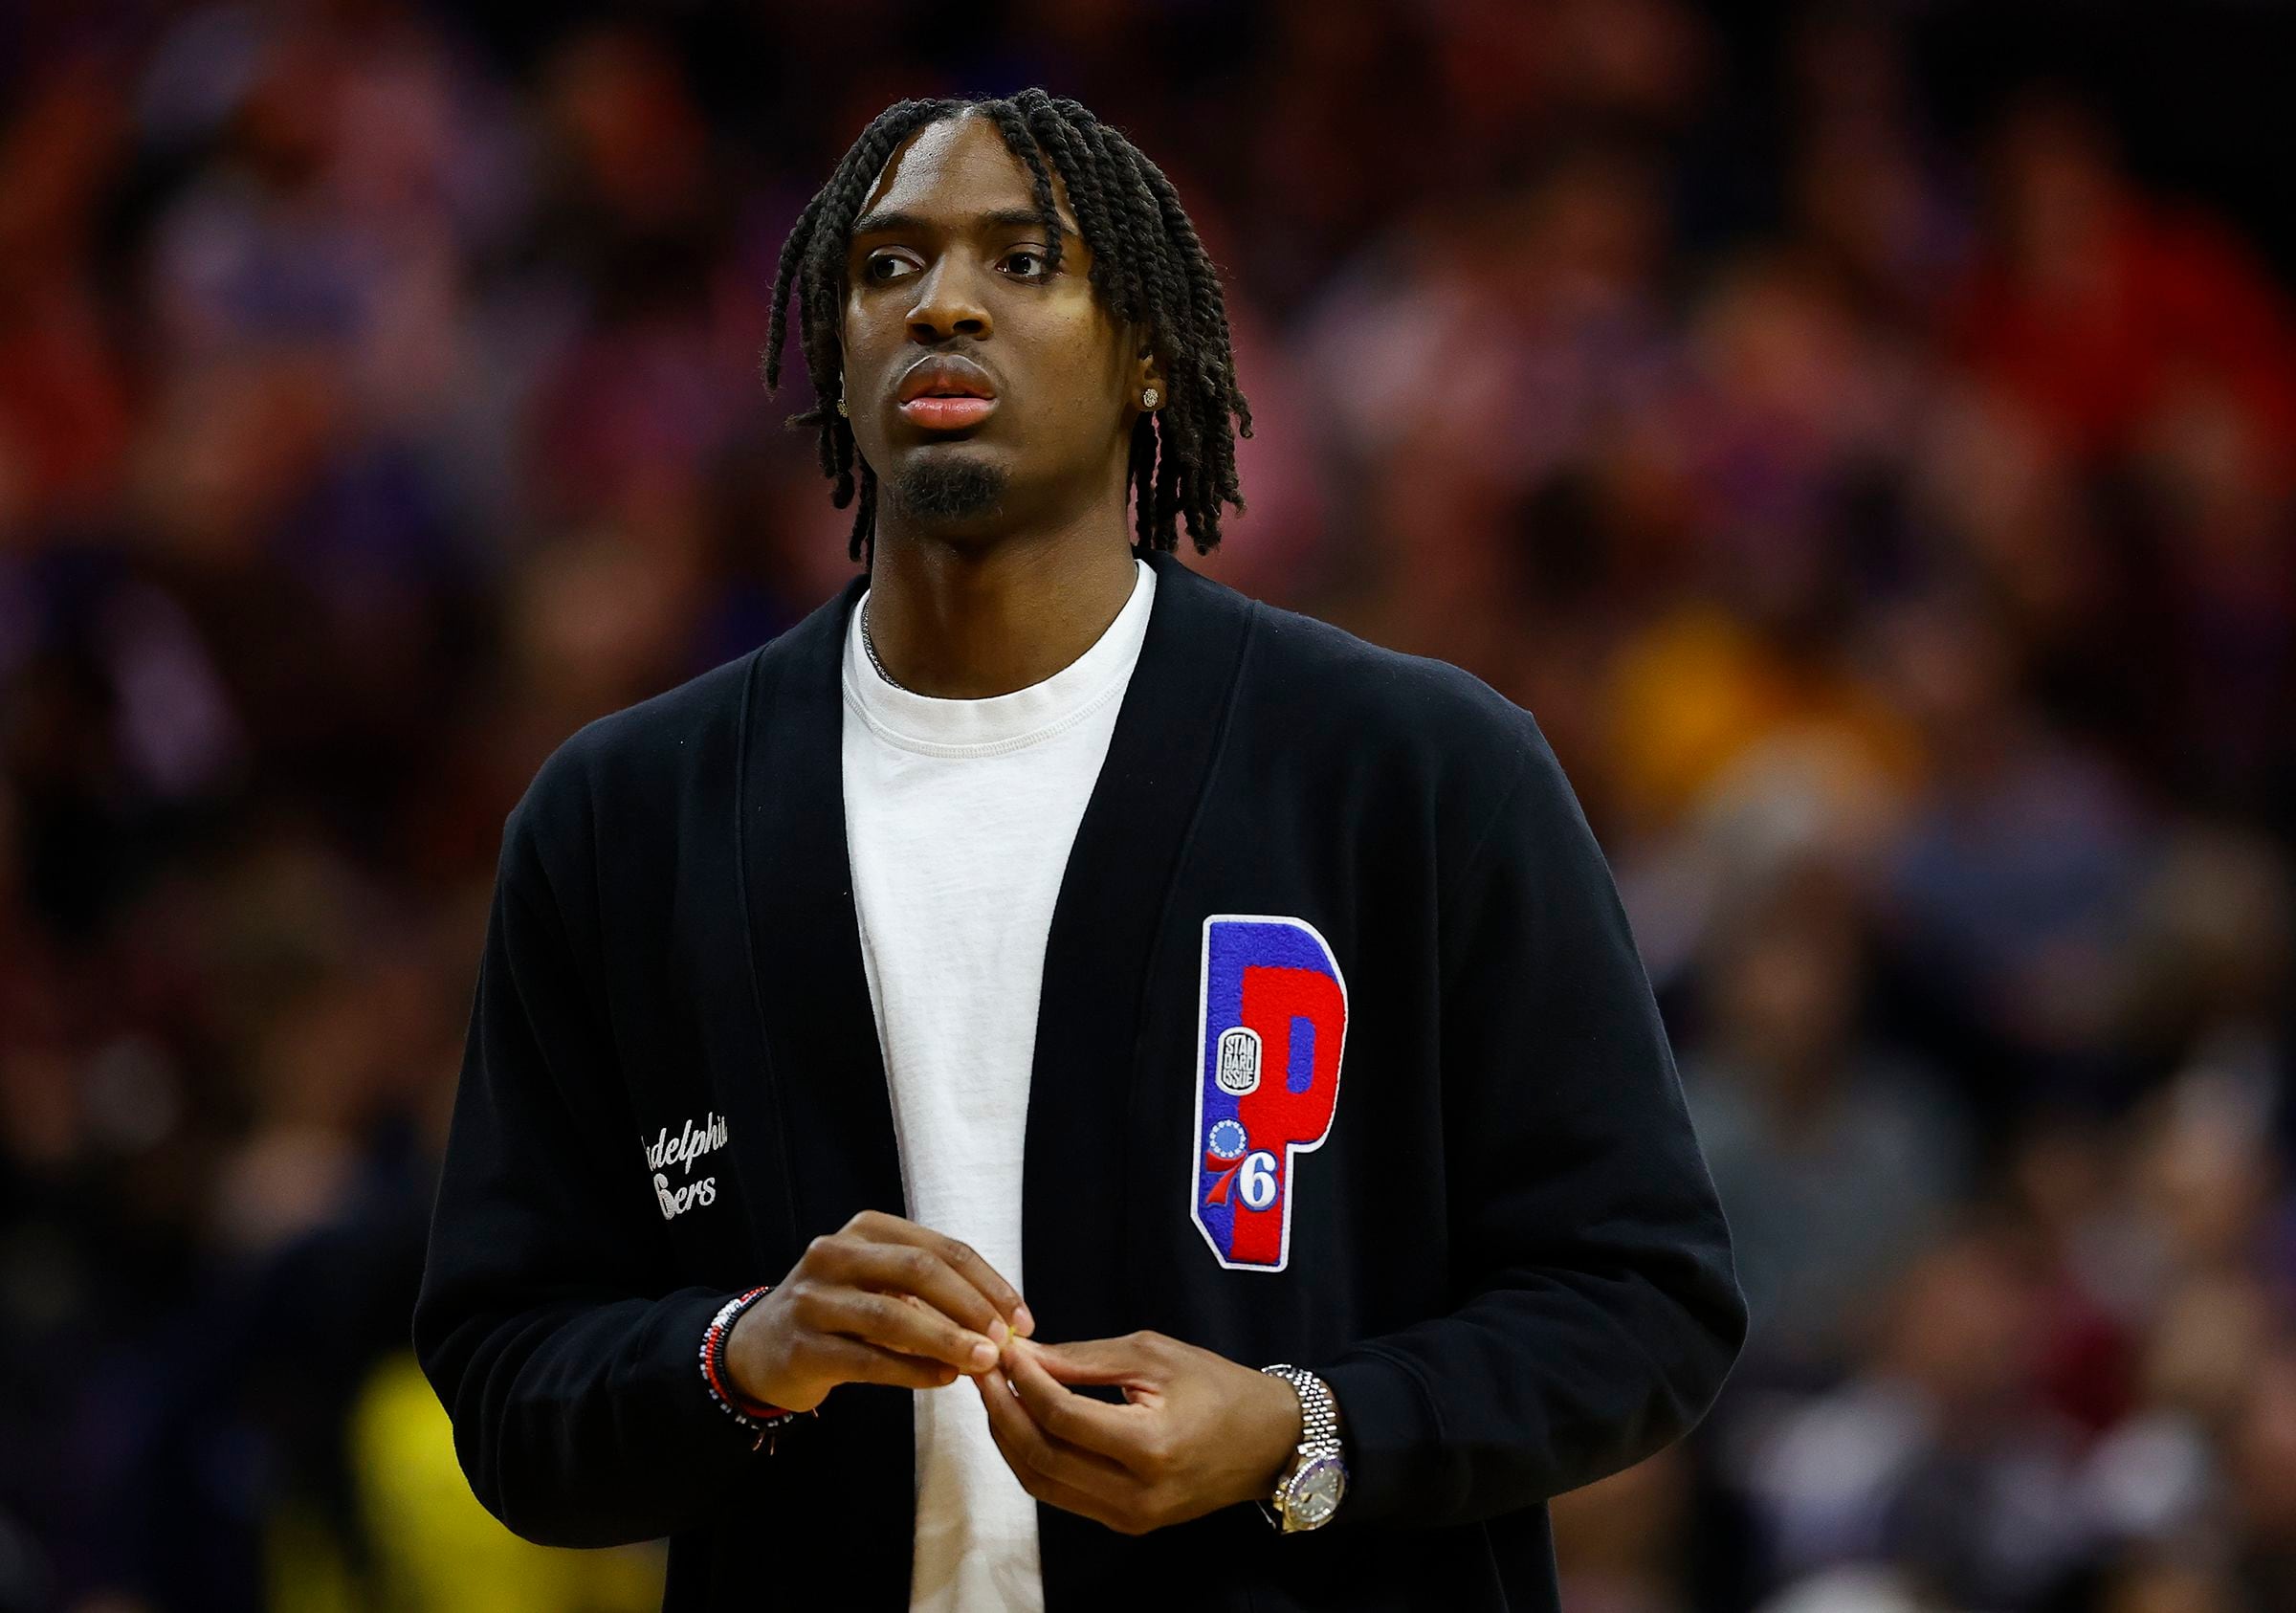 How the advice Tyrese Maxey's dad gave him when he was young became useful  in Sixers' Game 6 win 